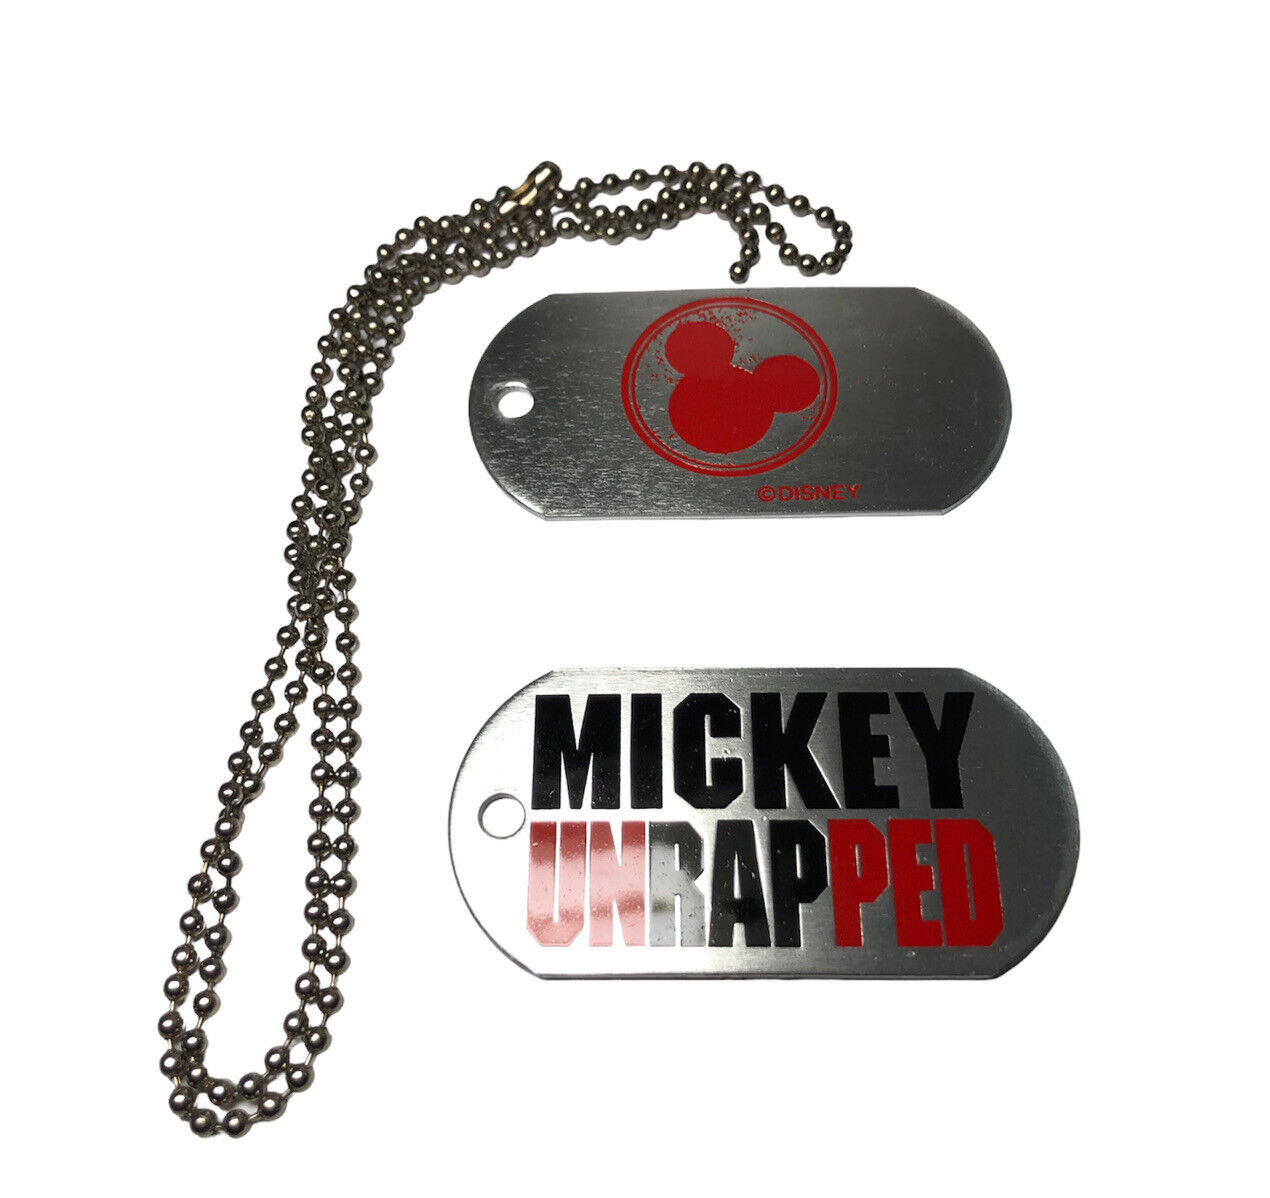 MICKEY (mouse) UNRAPPED DOGTAG - RARE -Whoopi Color Me Badd - Disney Vintage